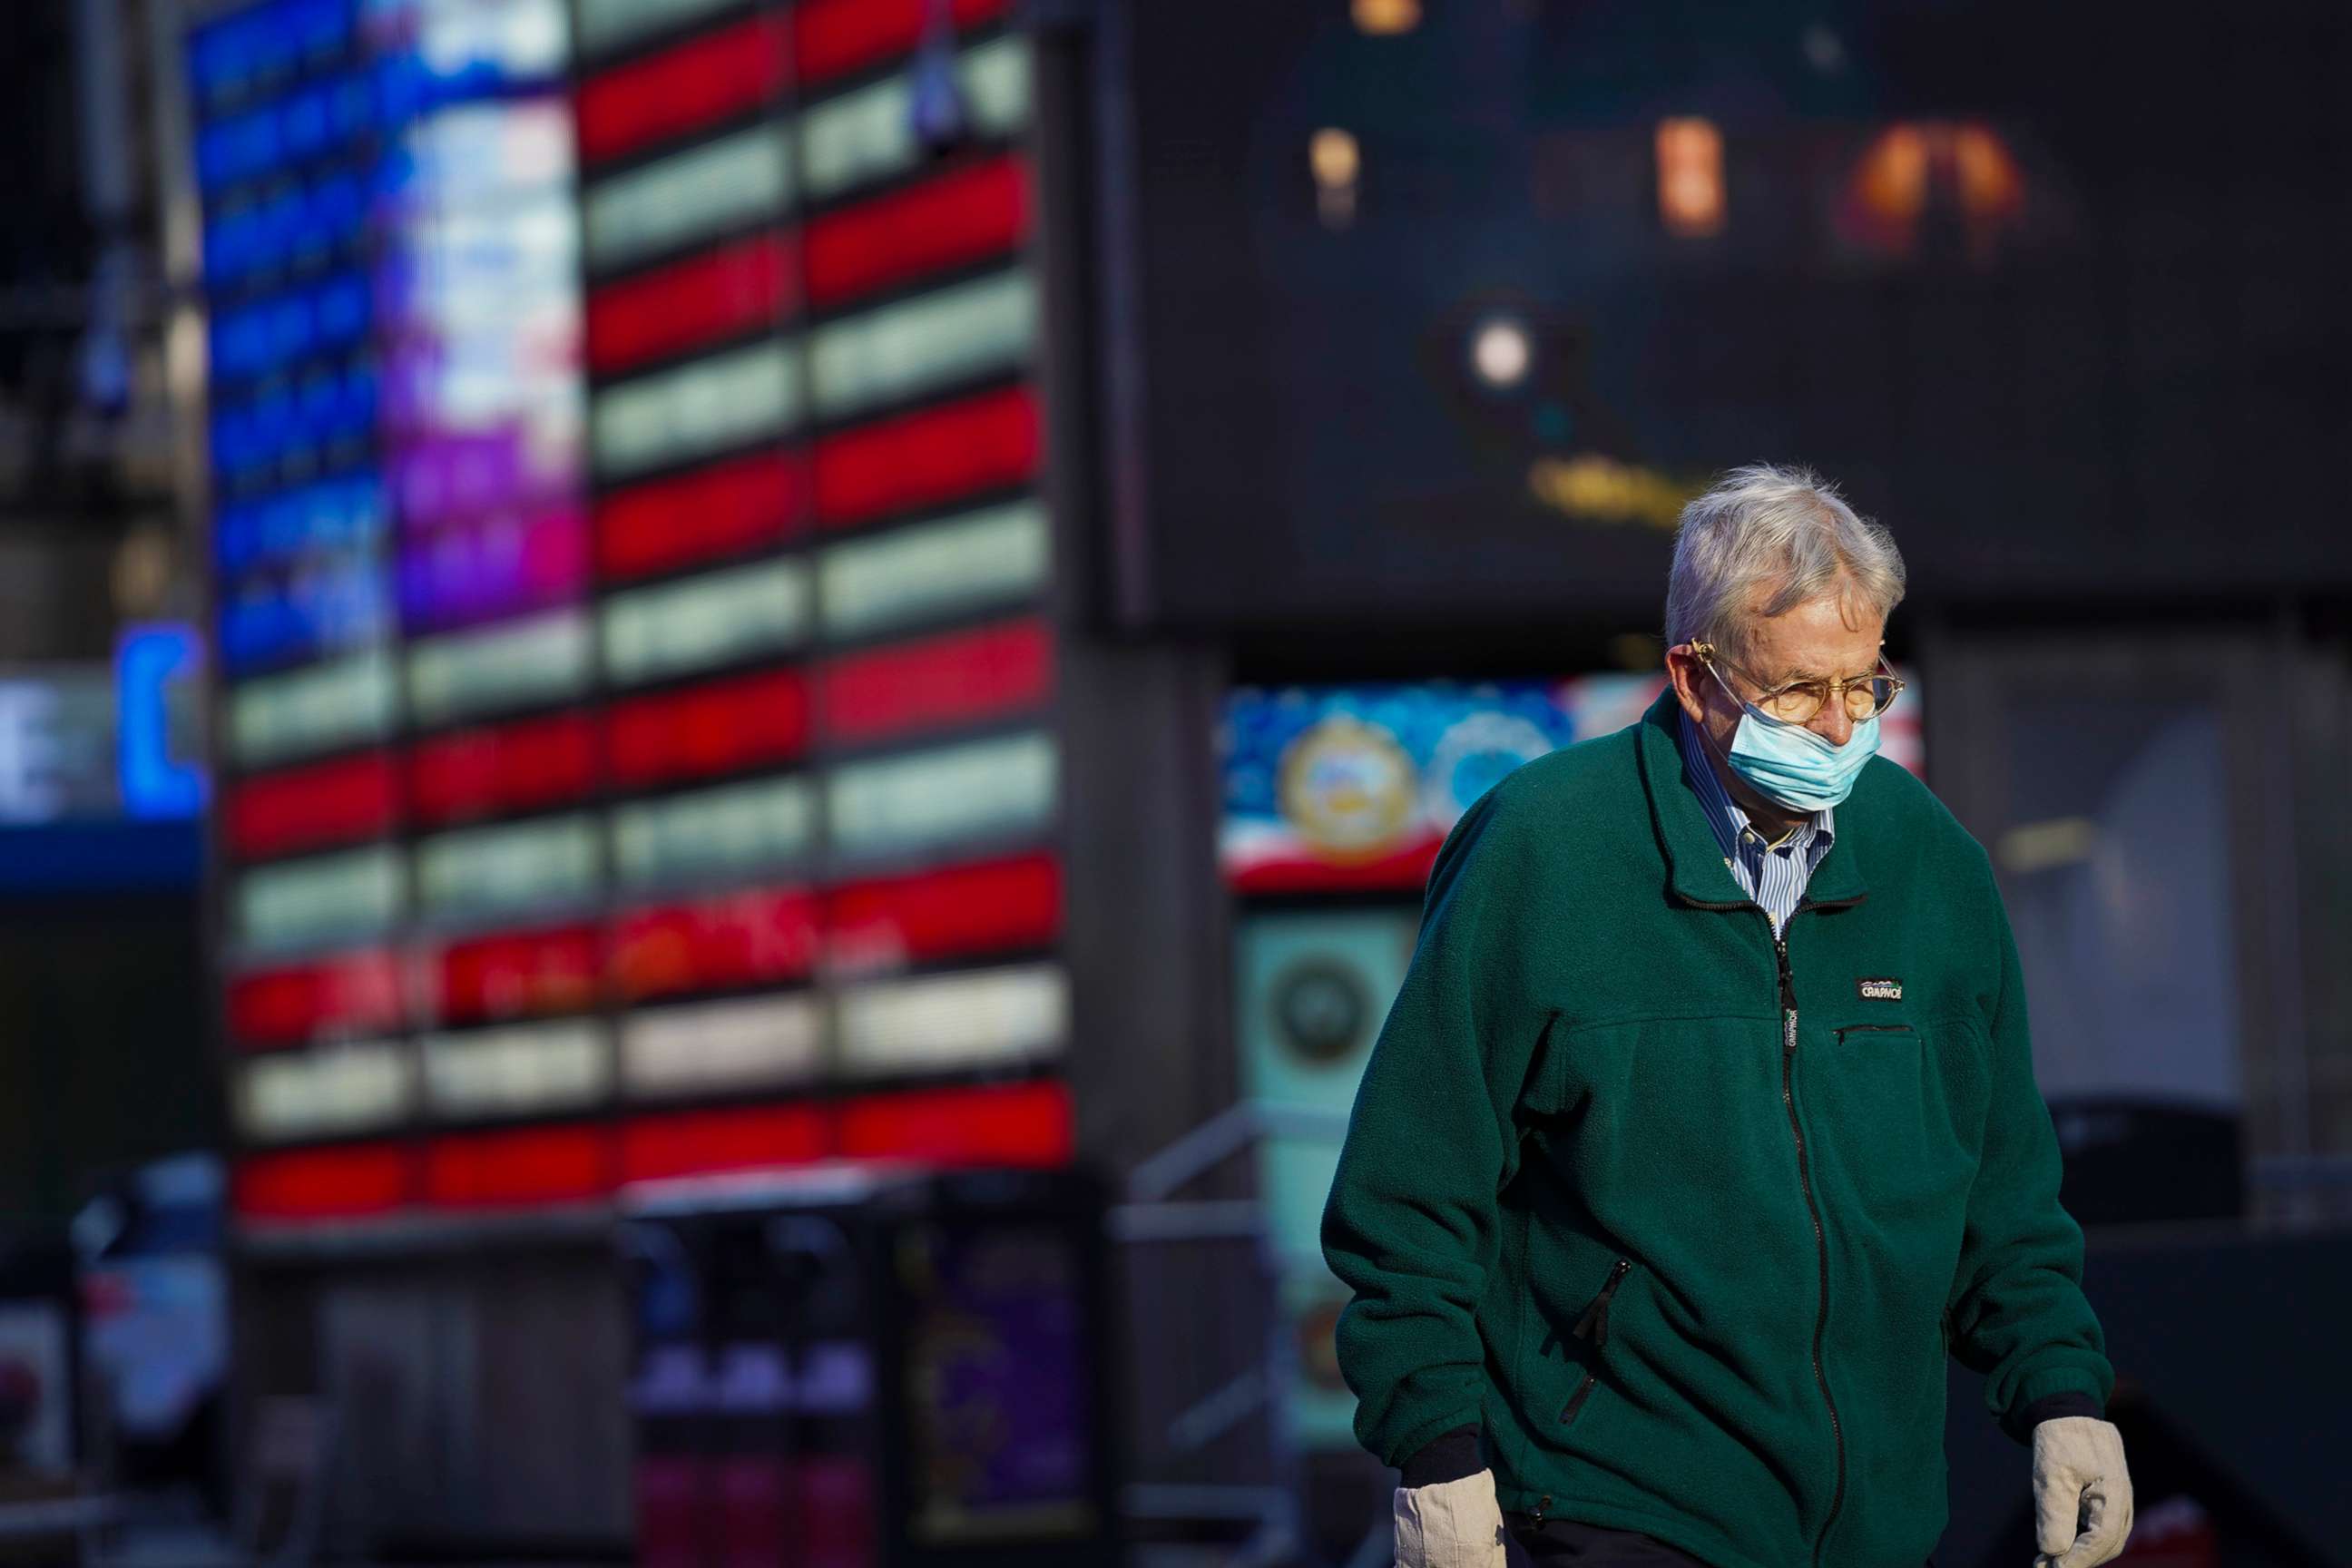 PHOTO: A man wears a face mask while walking in Times Square in New York, Nov. 18, 2020.